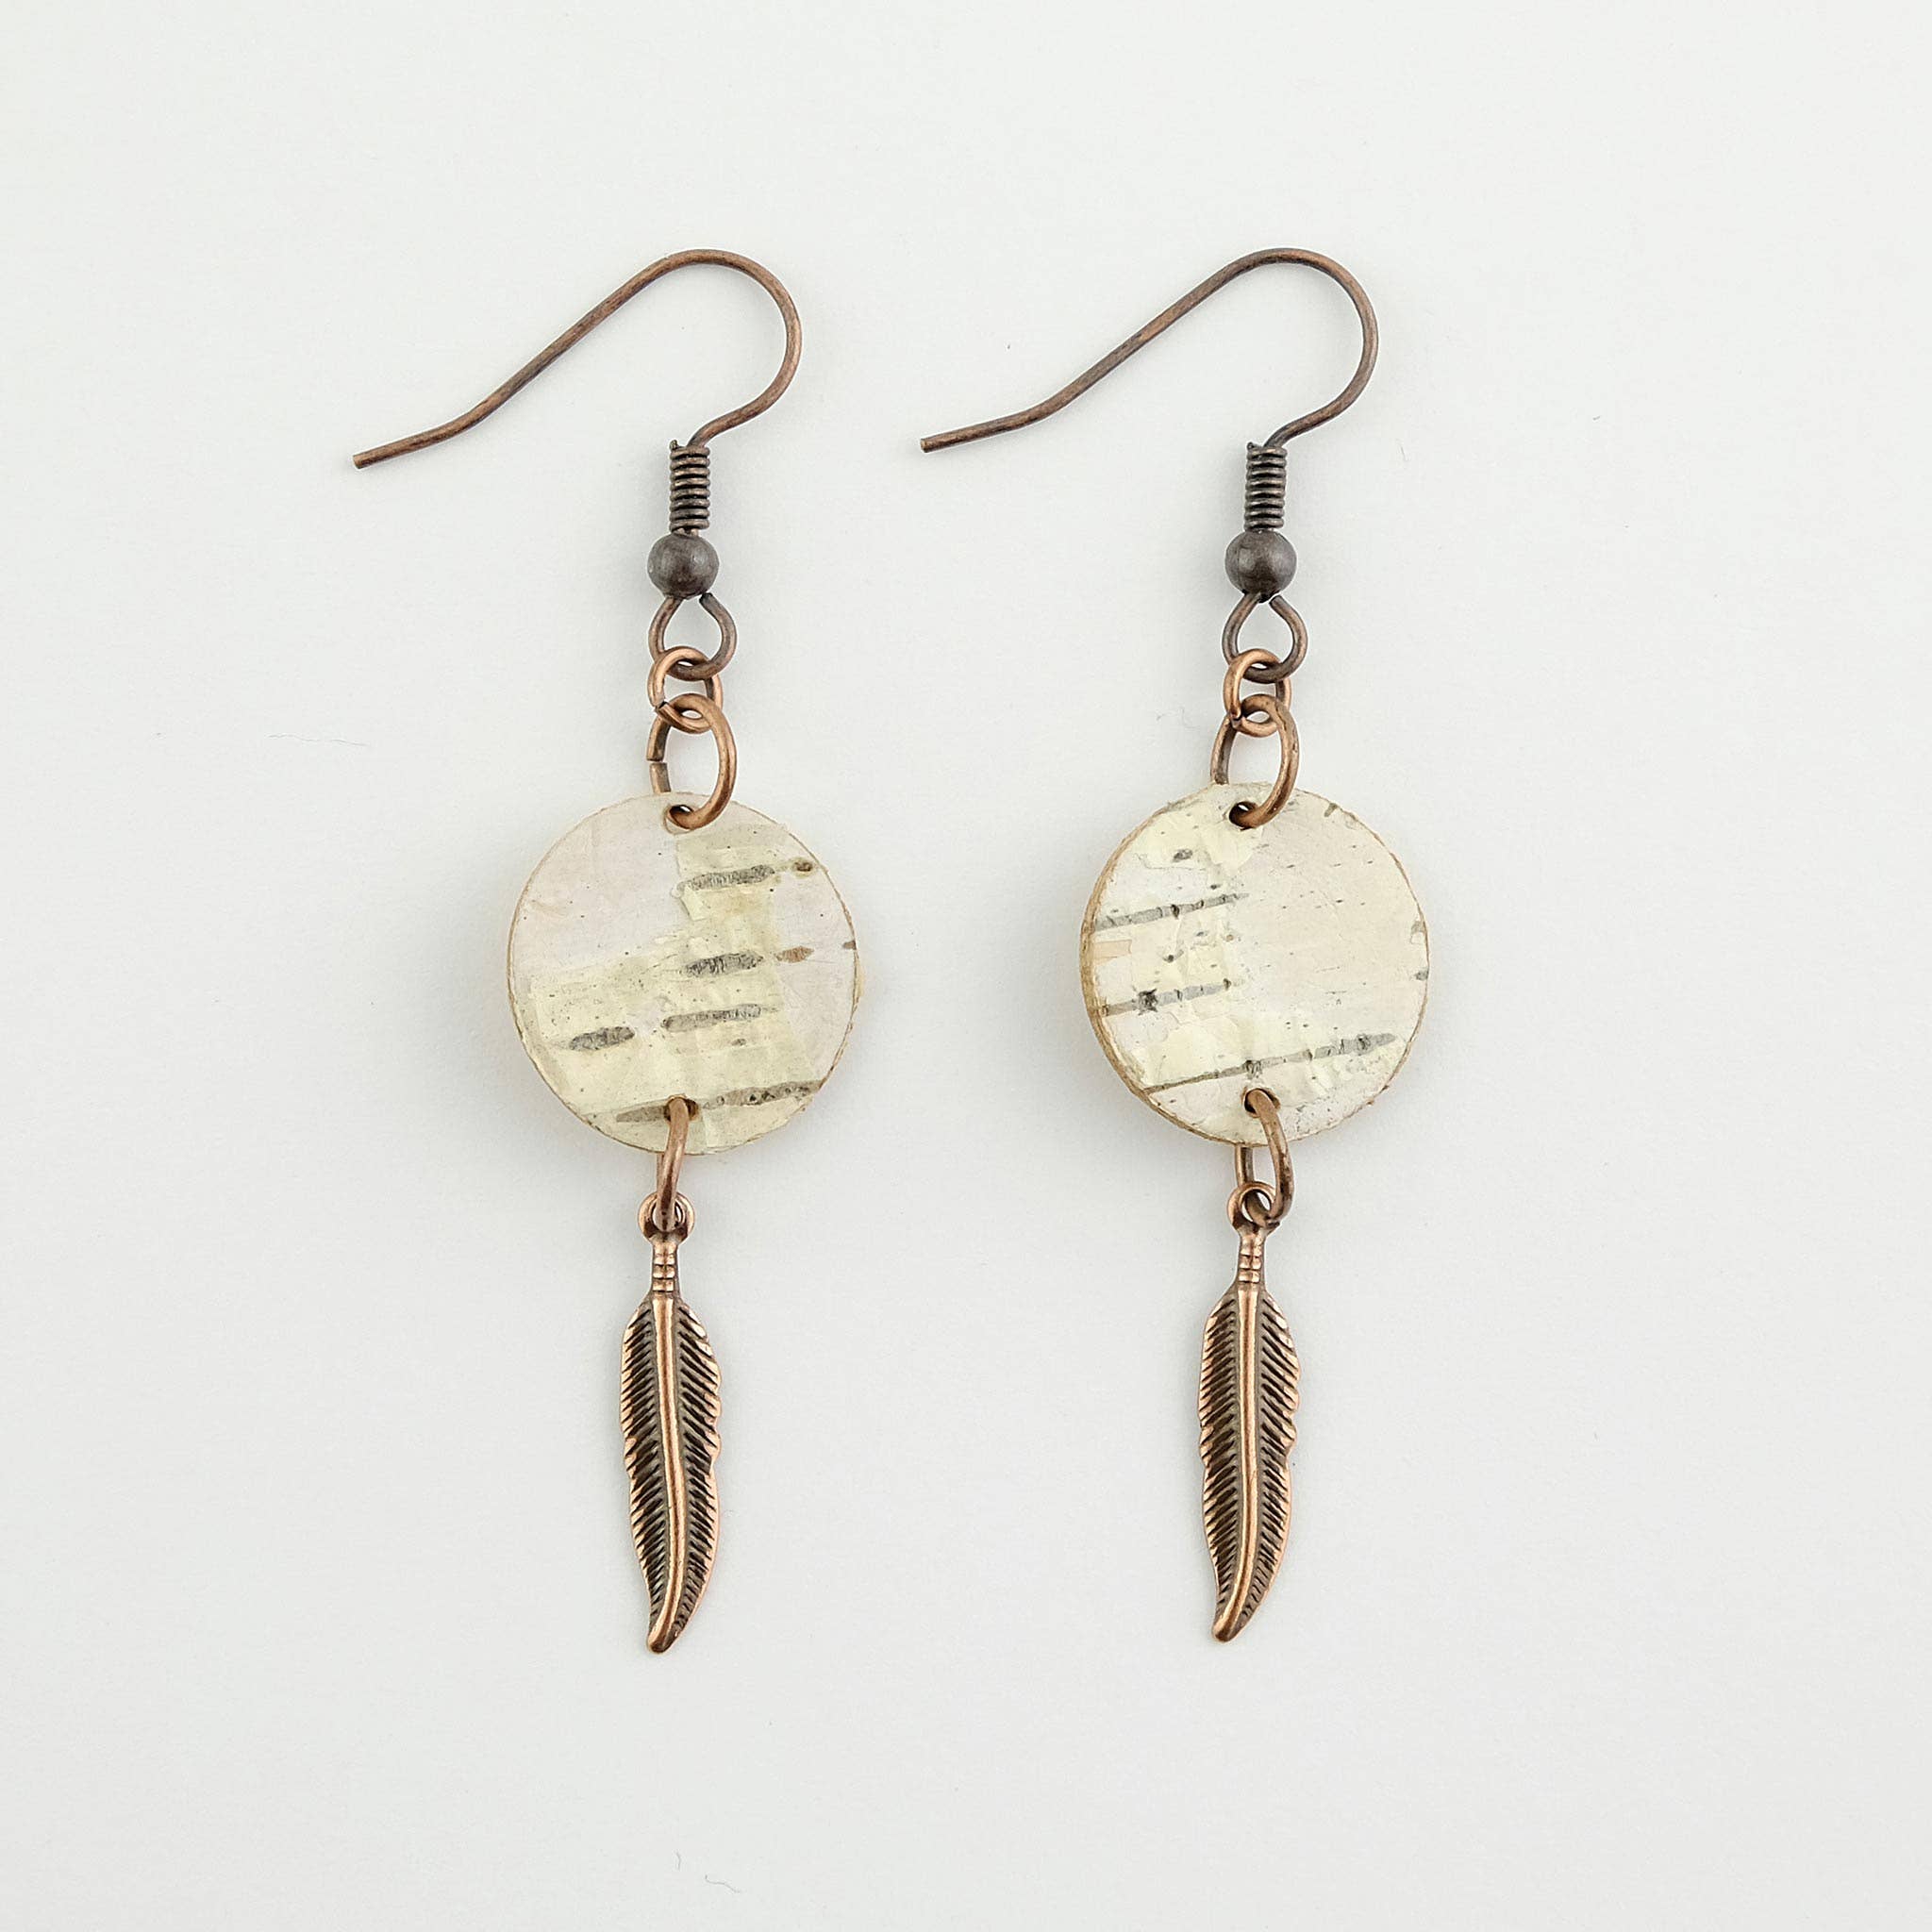 Birch Bark Earrings with Metal Feather